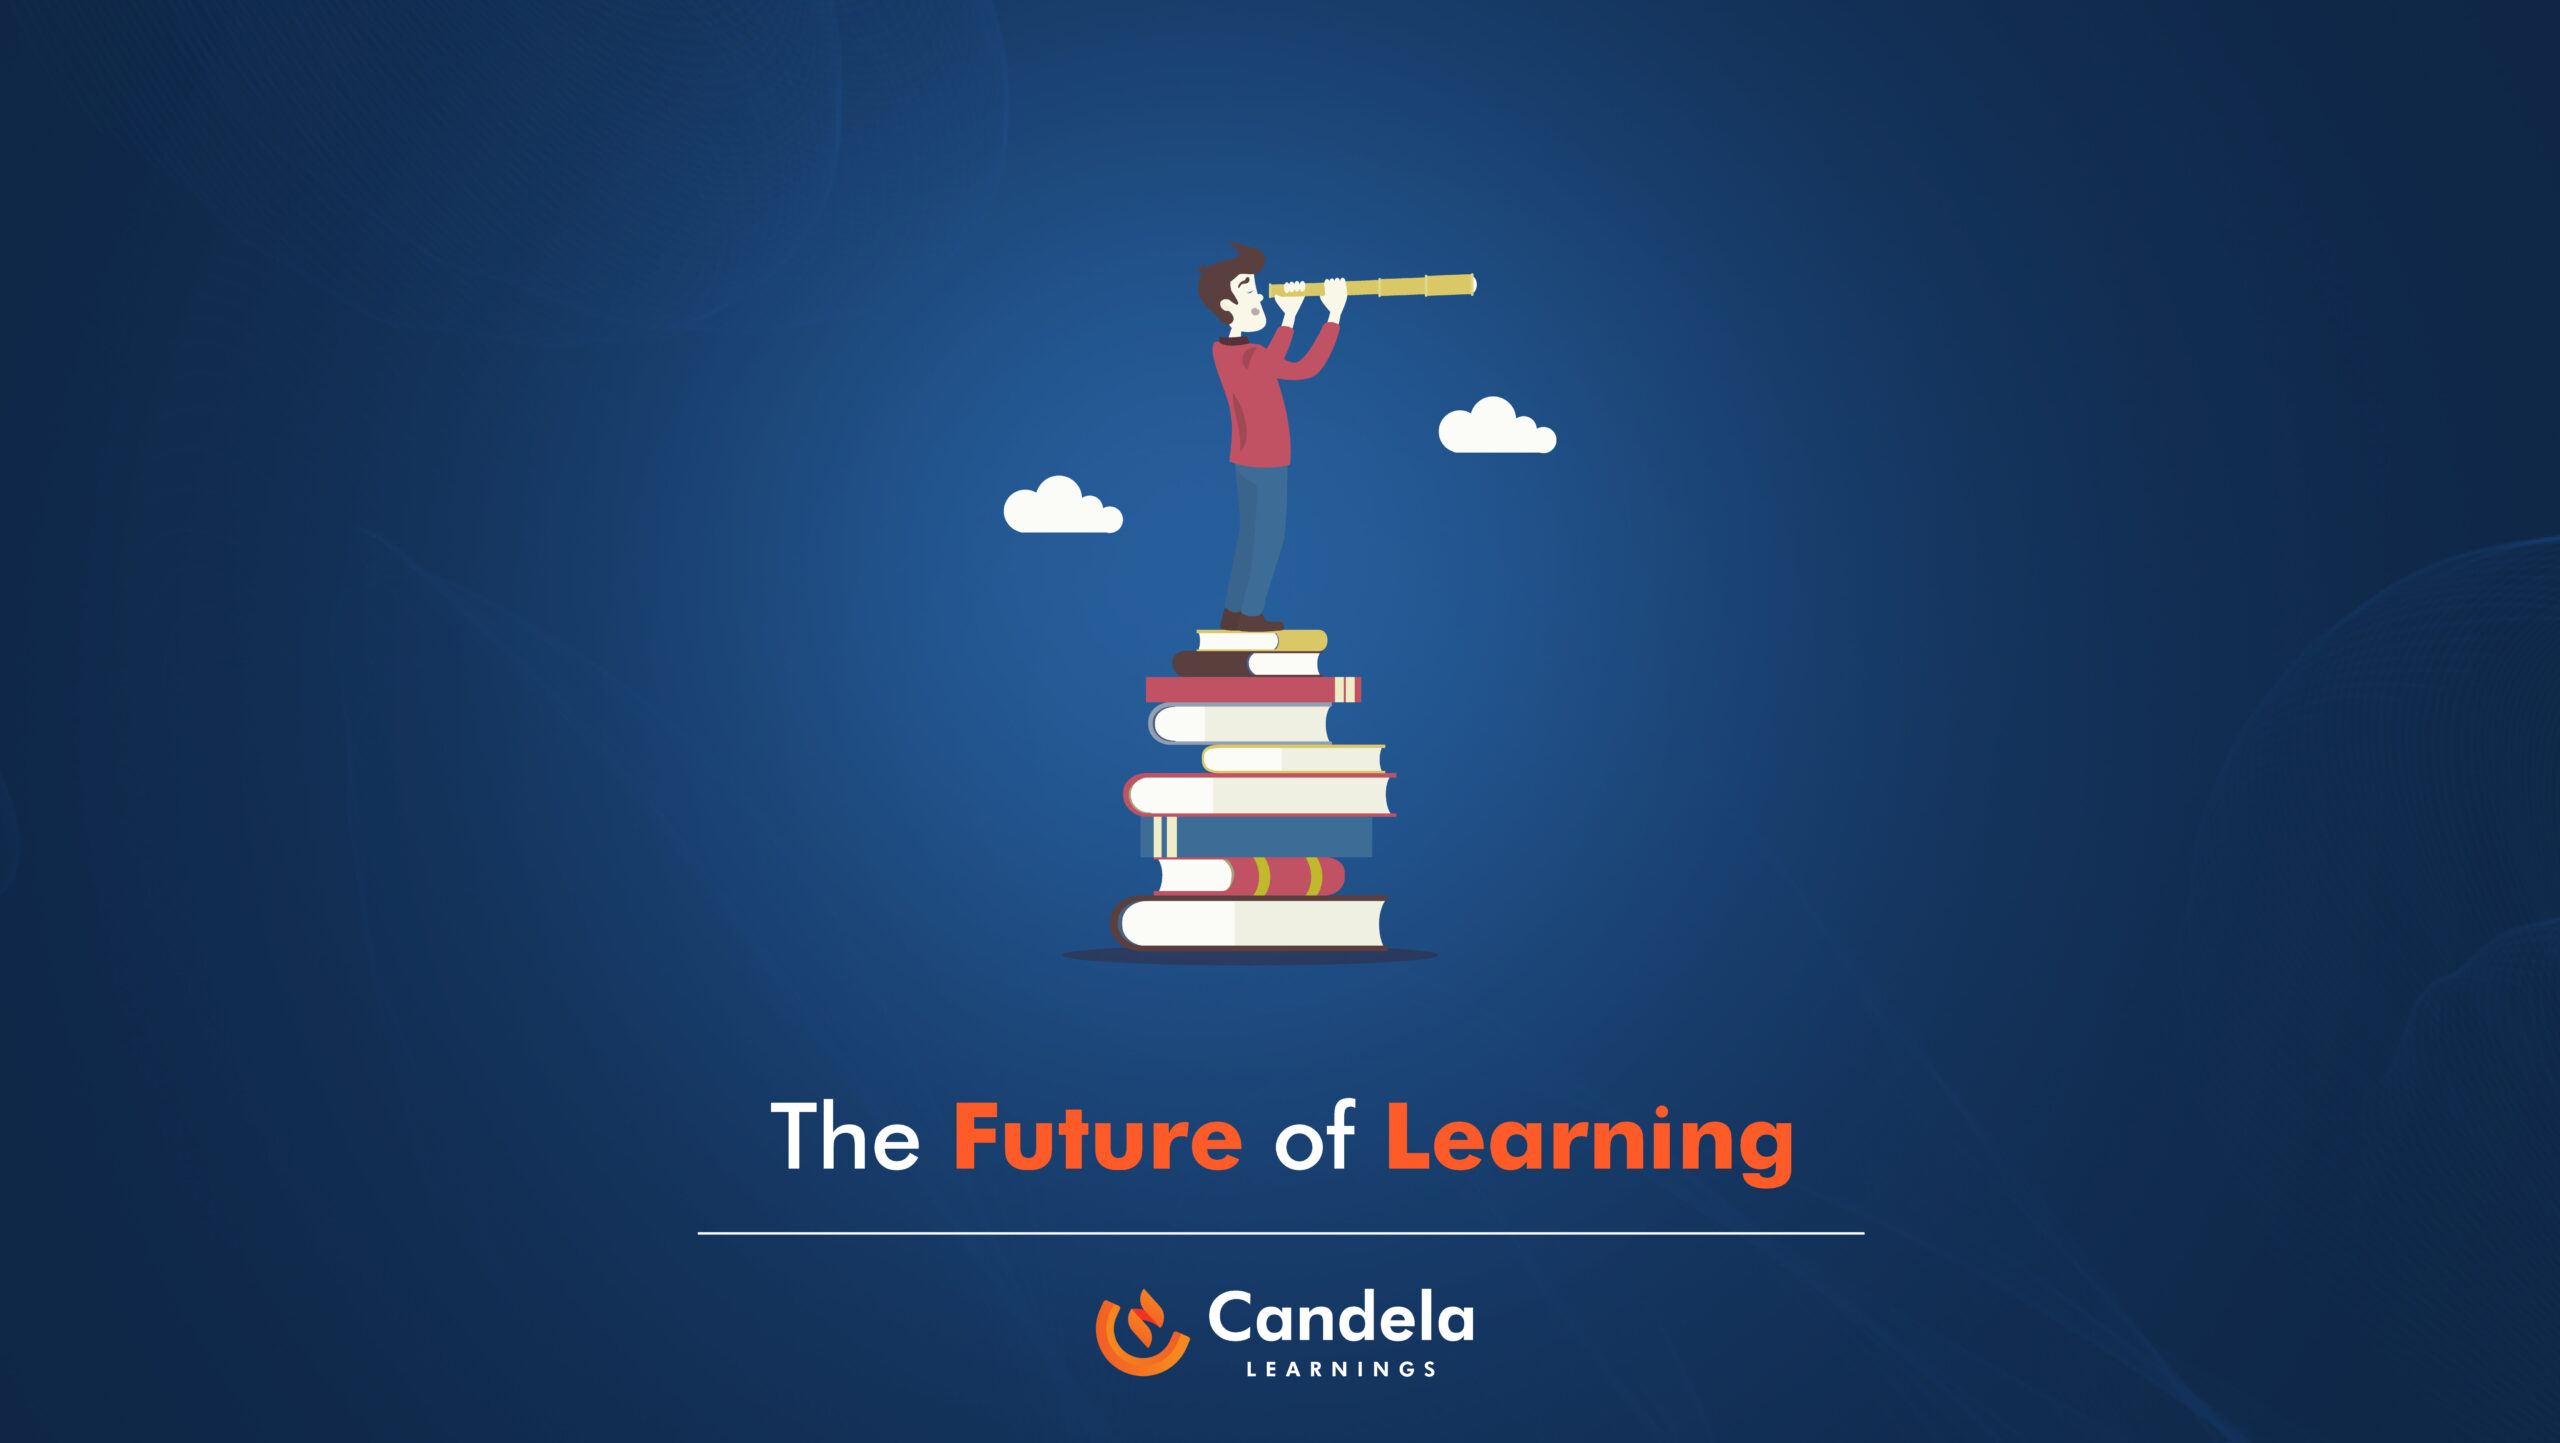 The future of learning